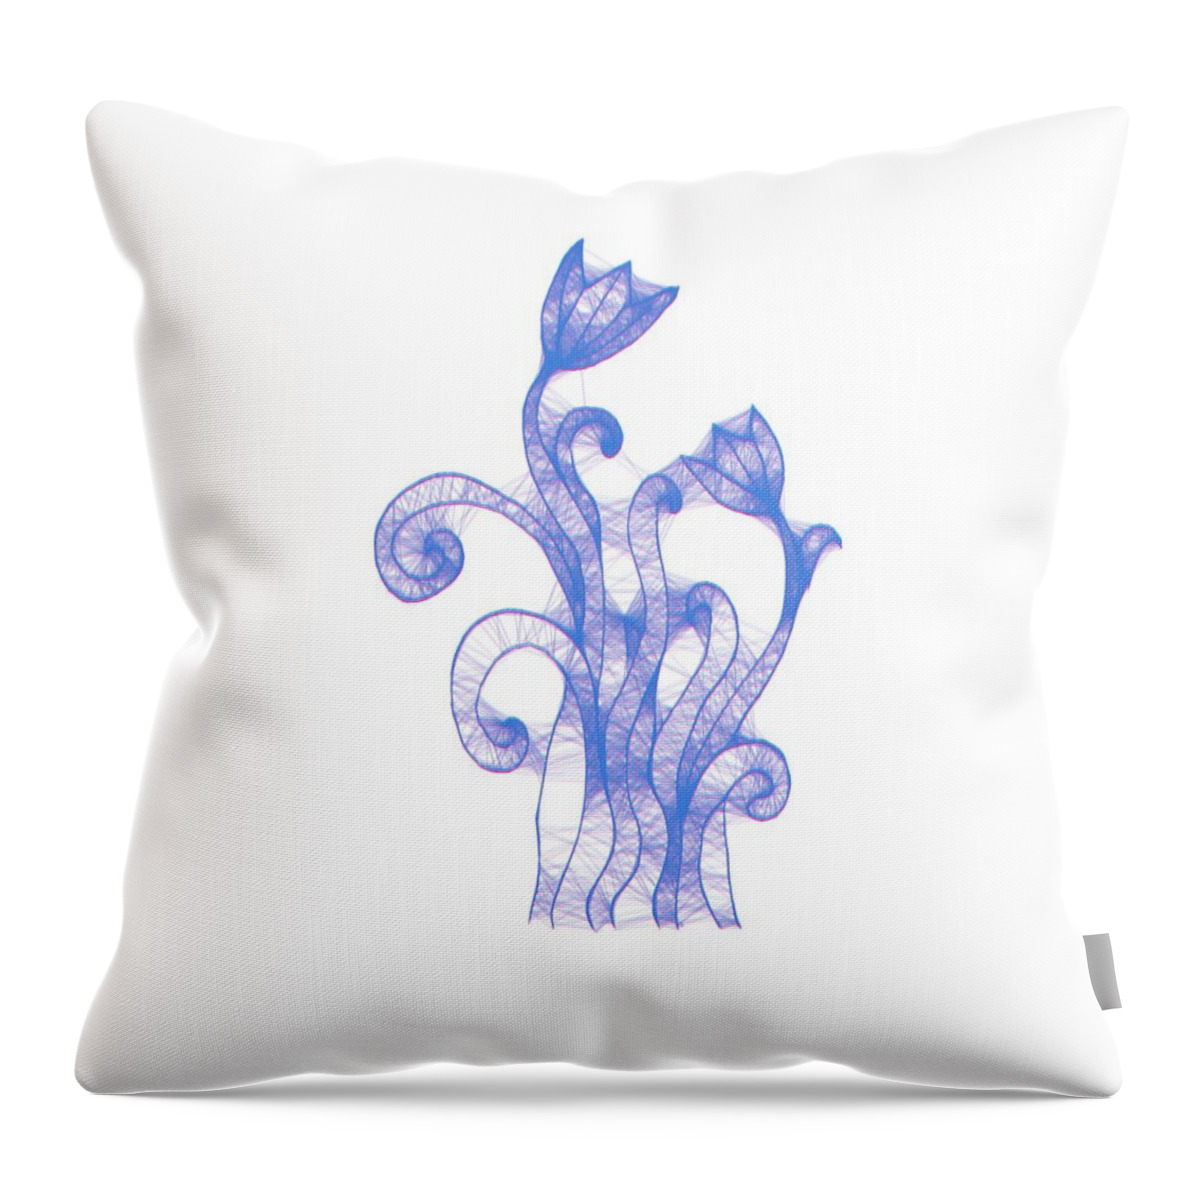 Flower Throw Pillow featuring the painting Spring Flower 4c by Celestial Images